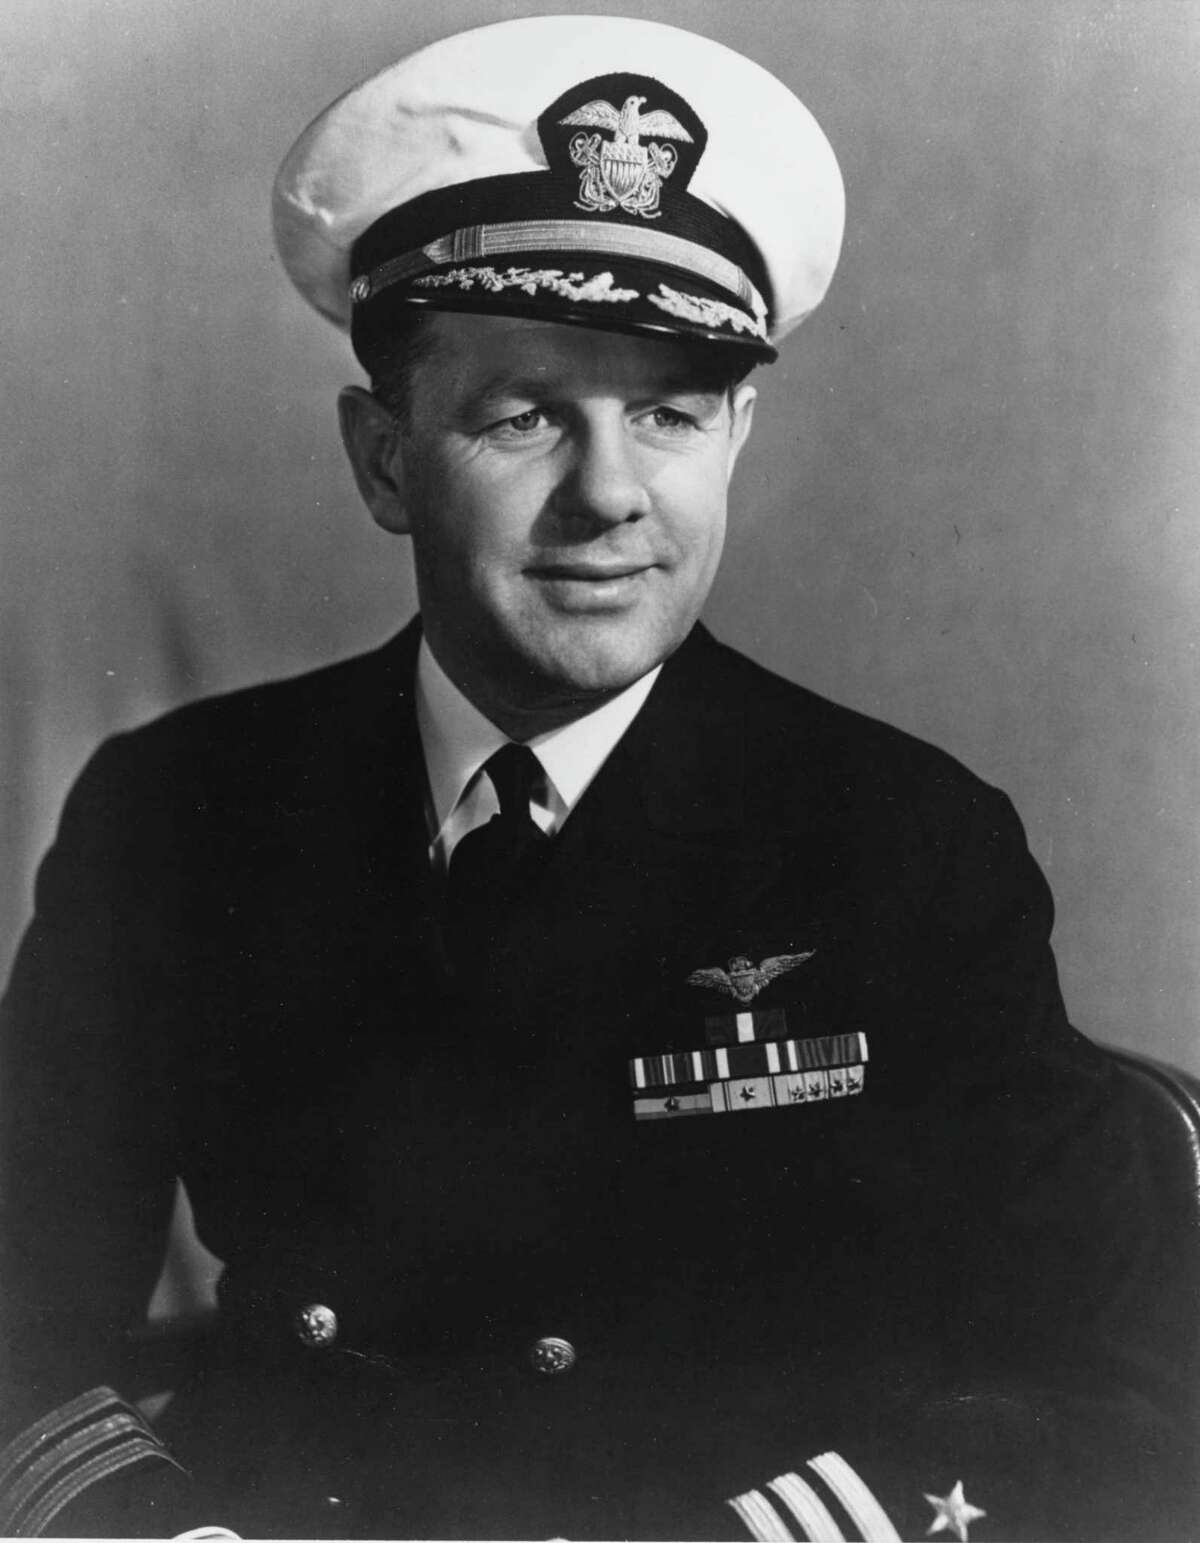 In this circa 1943 photo provided by the U.S. Navy, C. Wade McClusky Jr. poses for an official portrait. McClusky made one of the most fateful decisions of World War II, yet his actions during a history-changing battle have received scant recognition. That will change in his hometown of Buffalo, New York, where a statue of his likeness will be included in a new military monument being dedicated June 4, 2017, the 75th anniversary of the Battle of Midway. (United States Navy via AP)